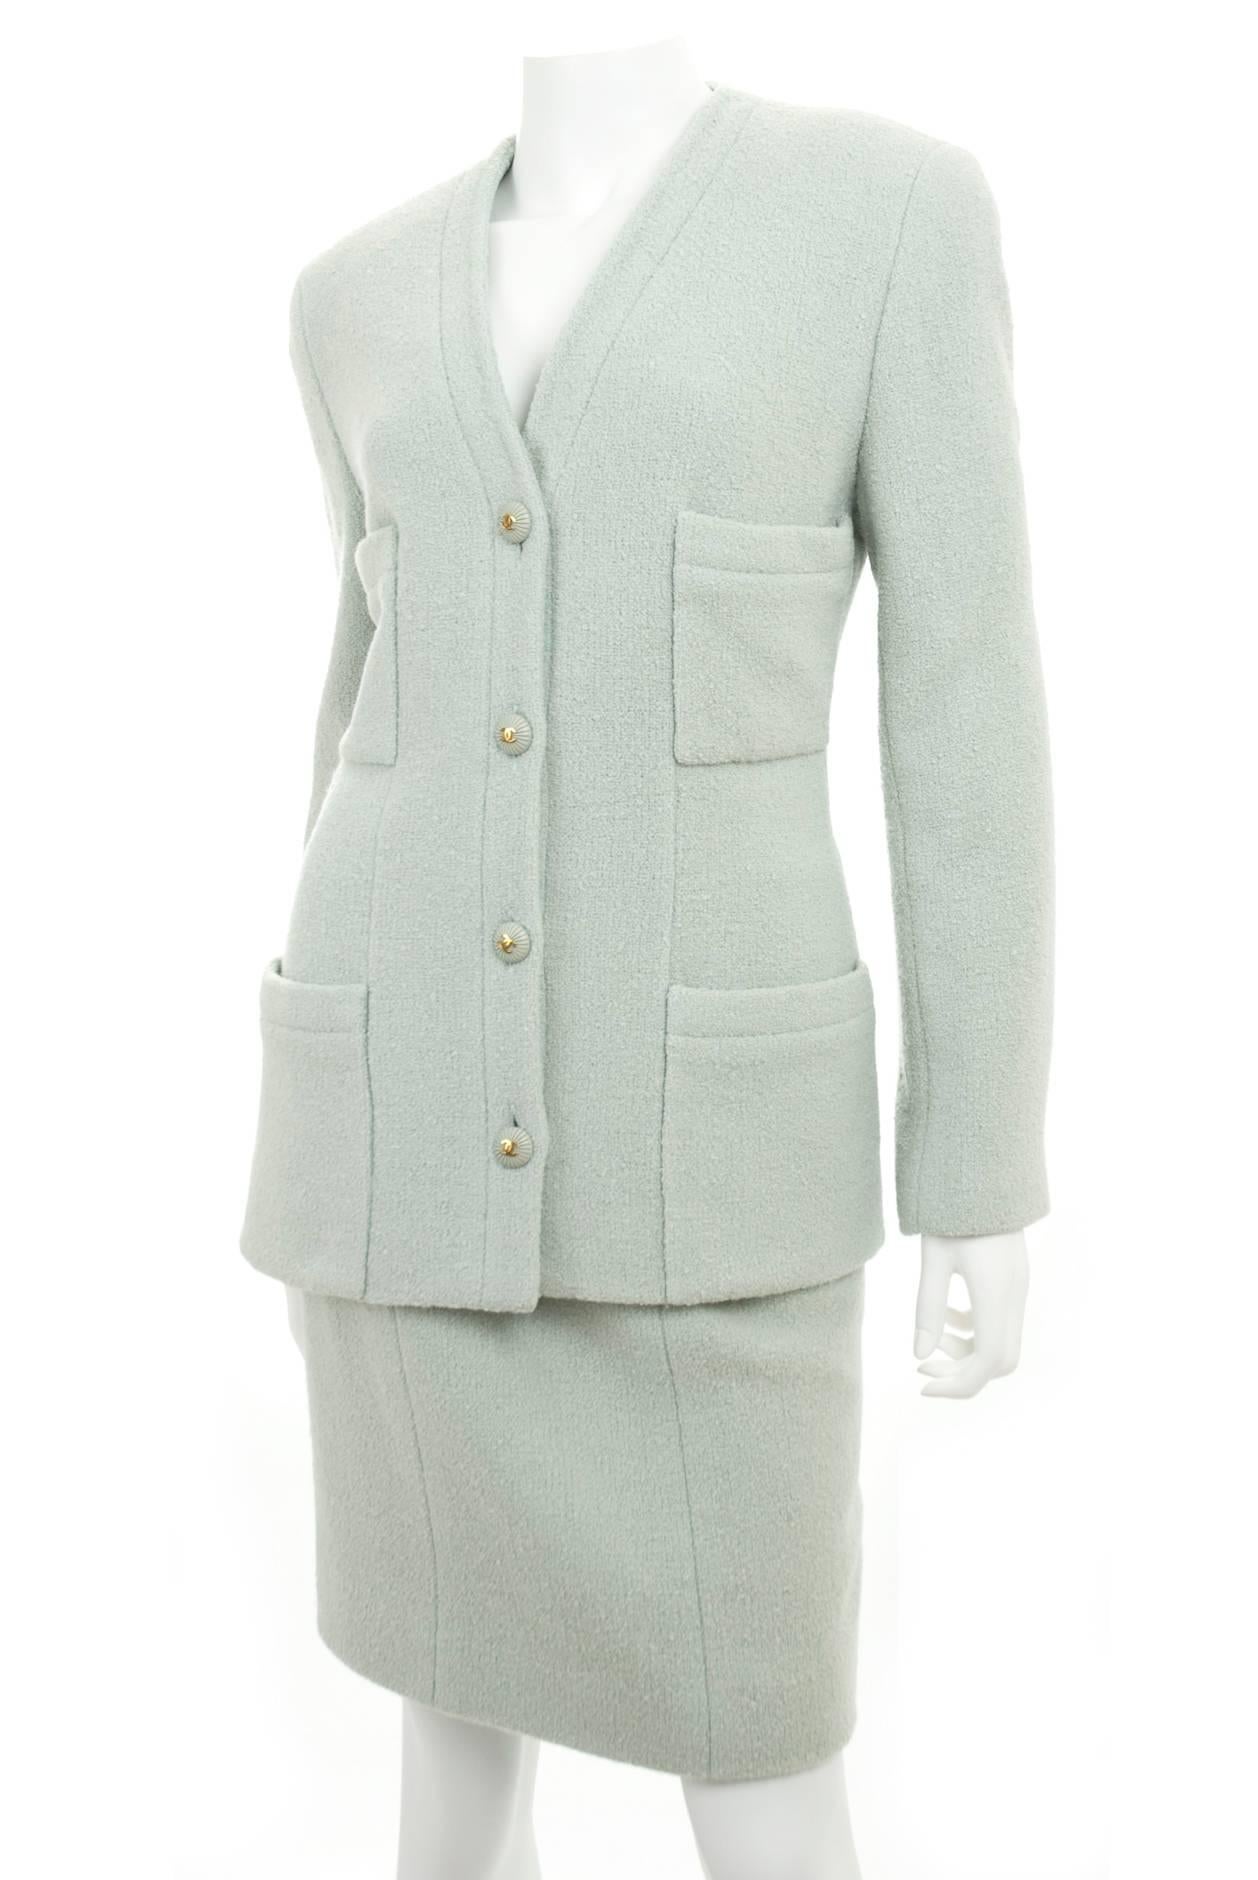 Gray Vintage 1993 Chanel Boucle Suit in Mint Green and CC Logo Buttons For Sale